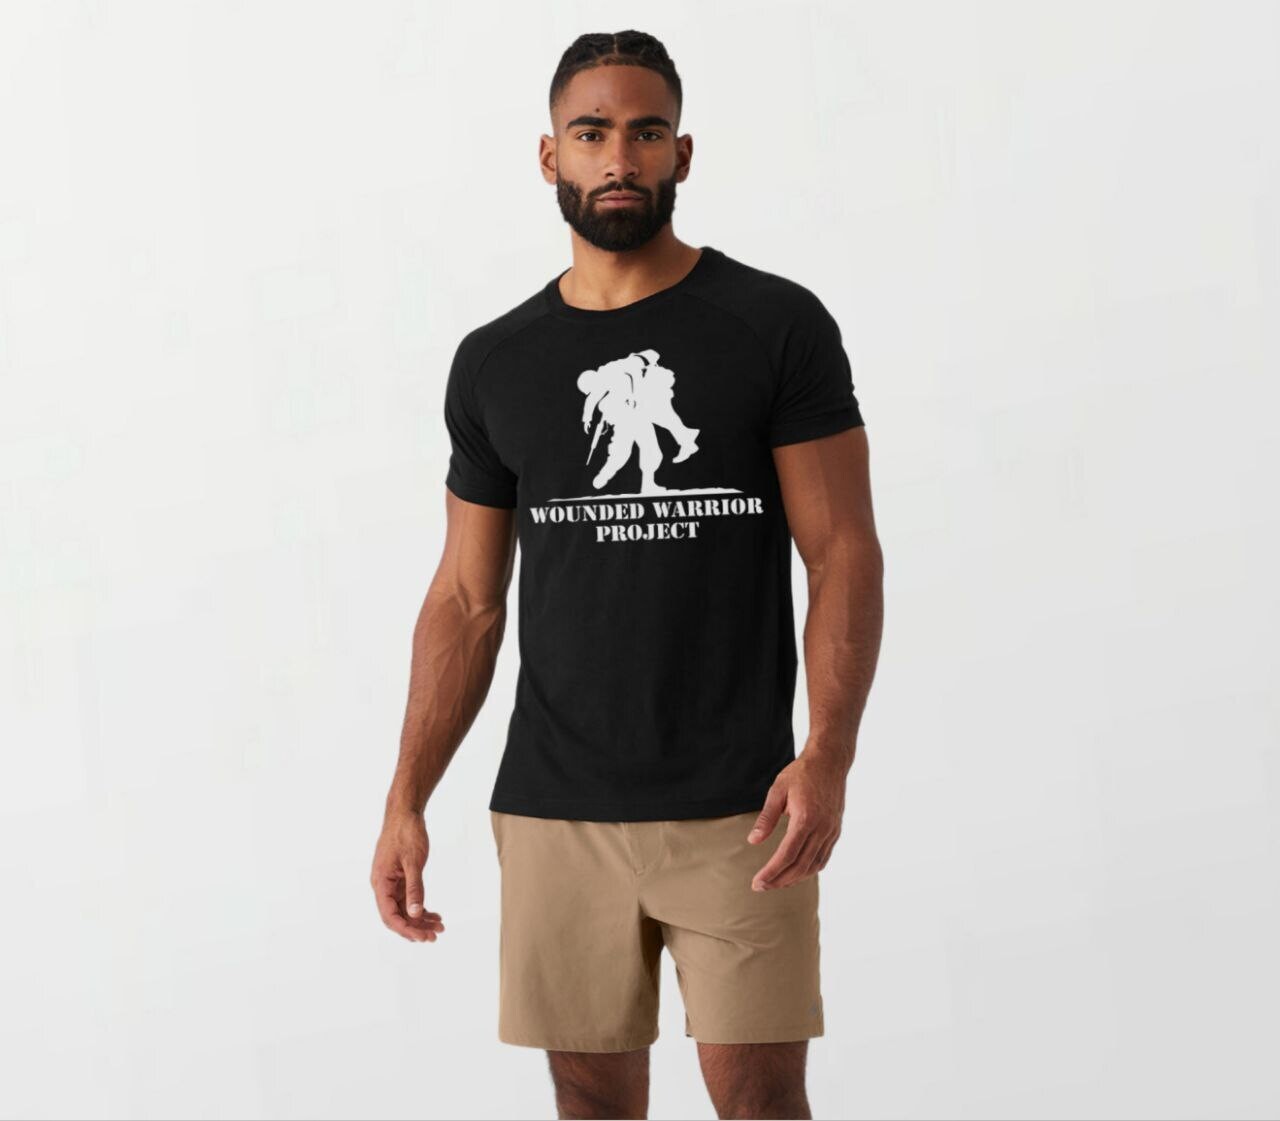 WWP_Elite Tee black
*ALL PROFITS ARE DONATED TO WWP*